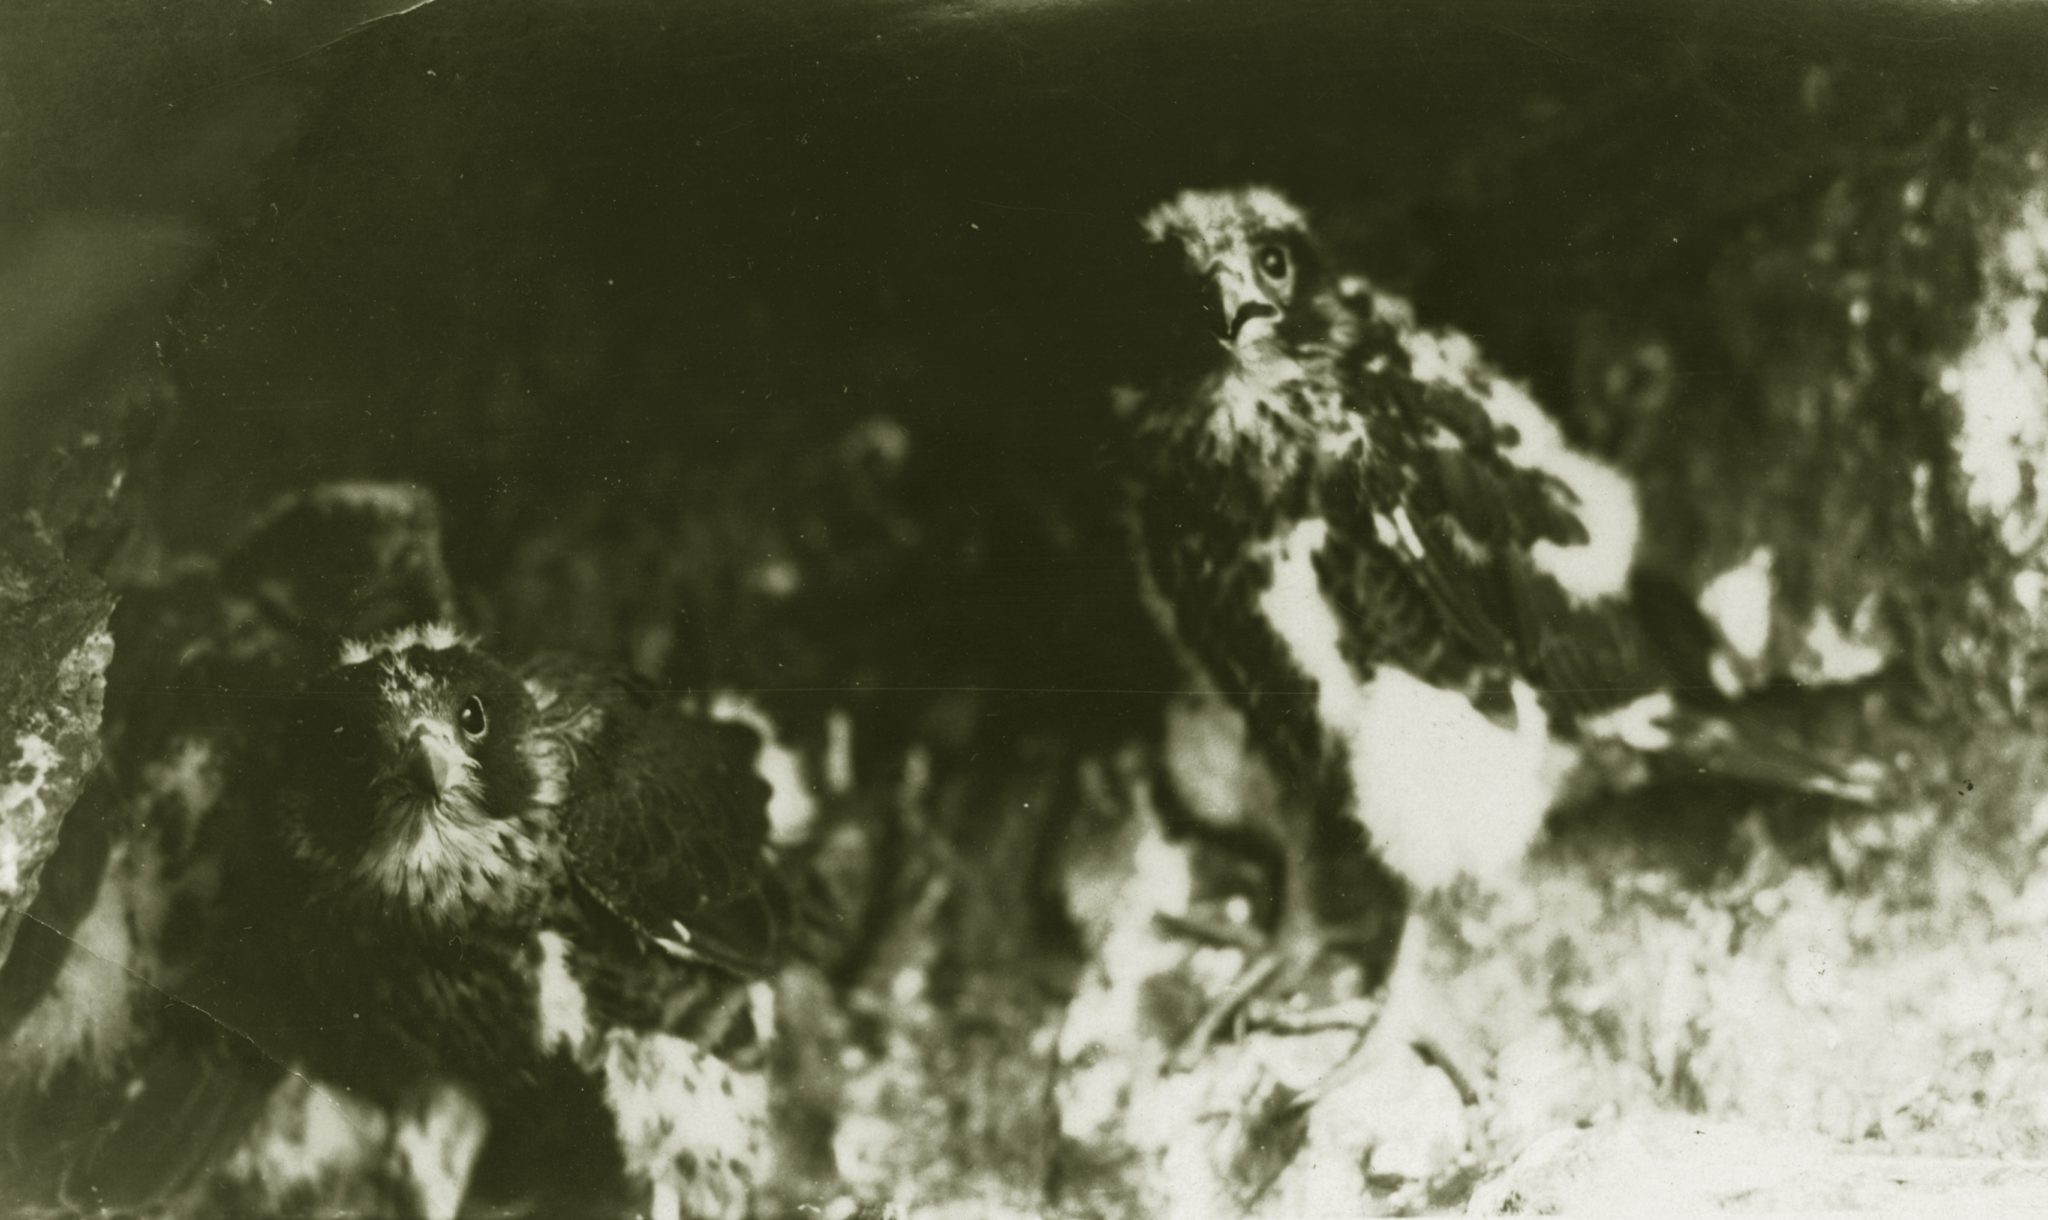 Peregrine Falcon nestlings photographed by Brockway Crouch, 1920s.